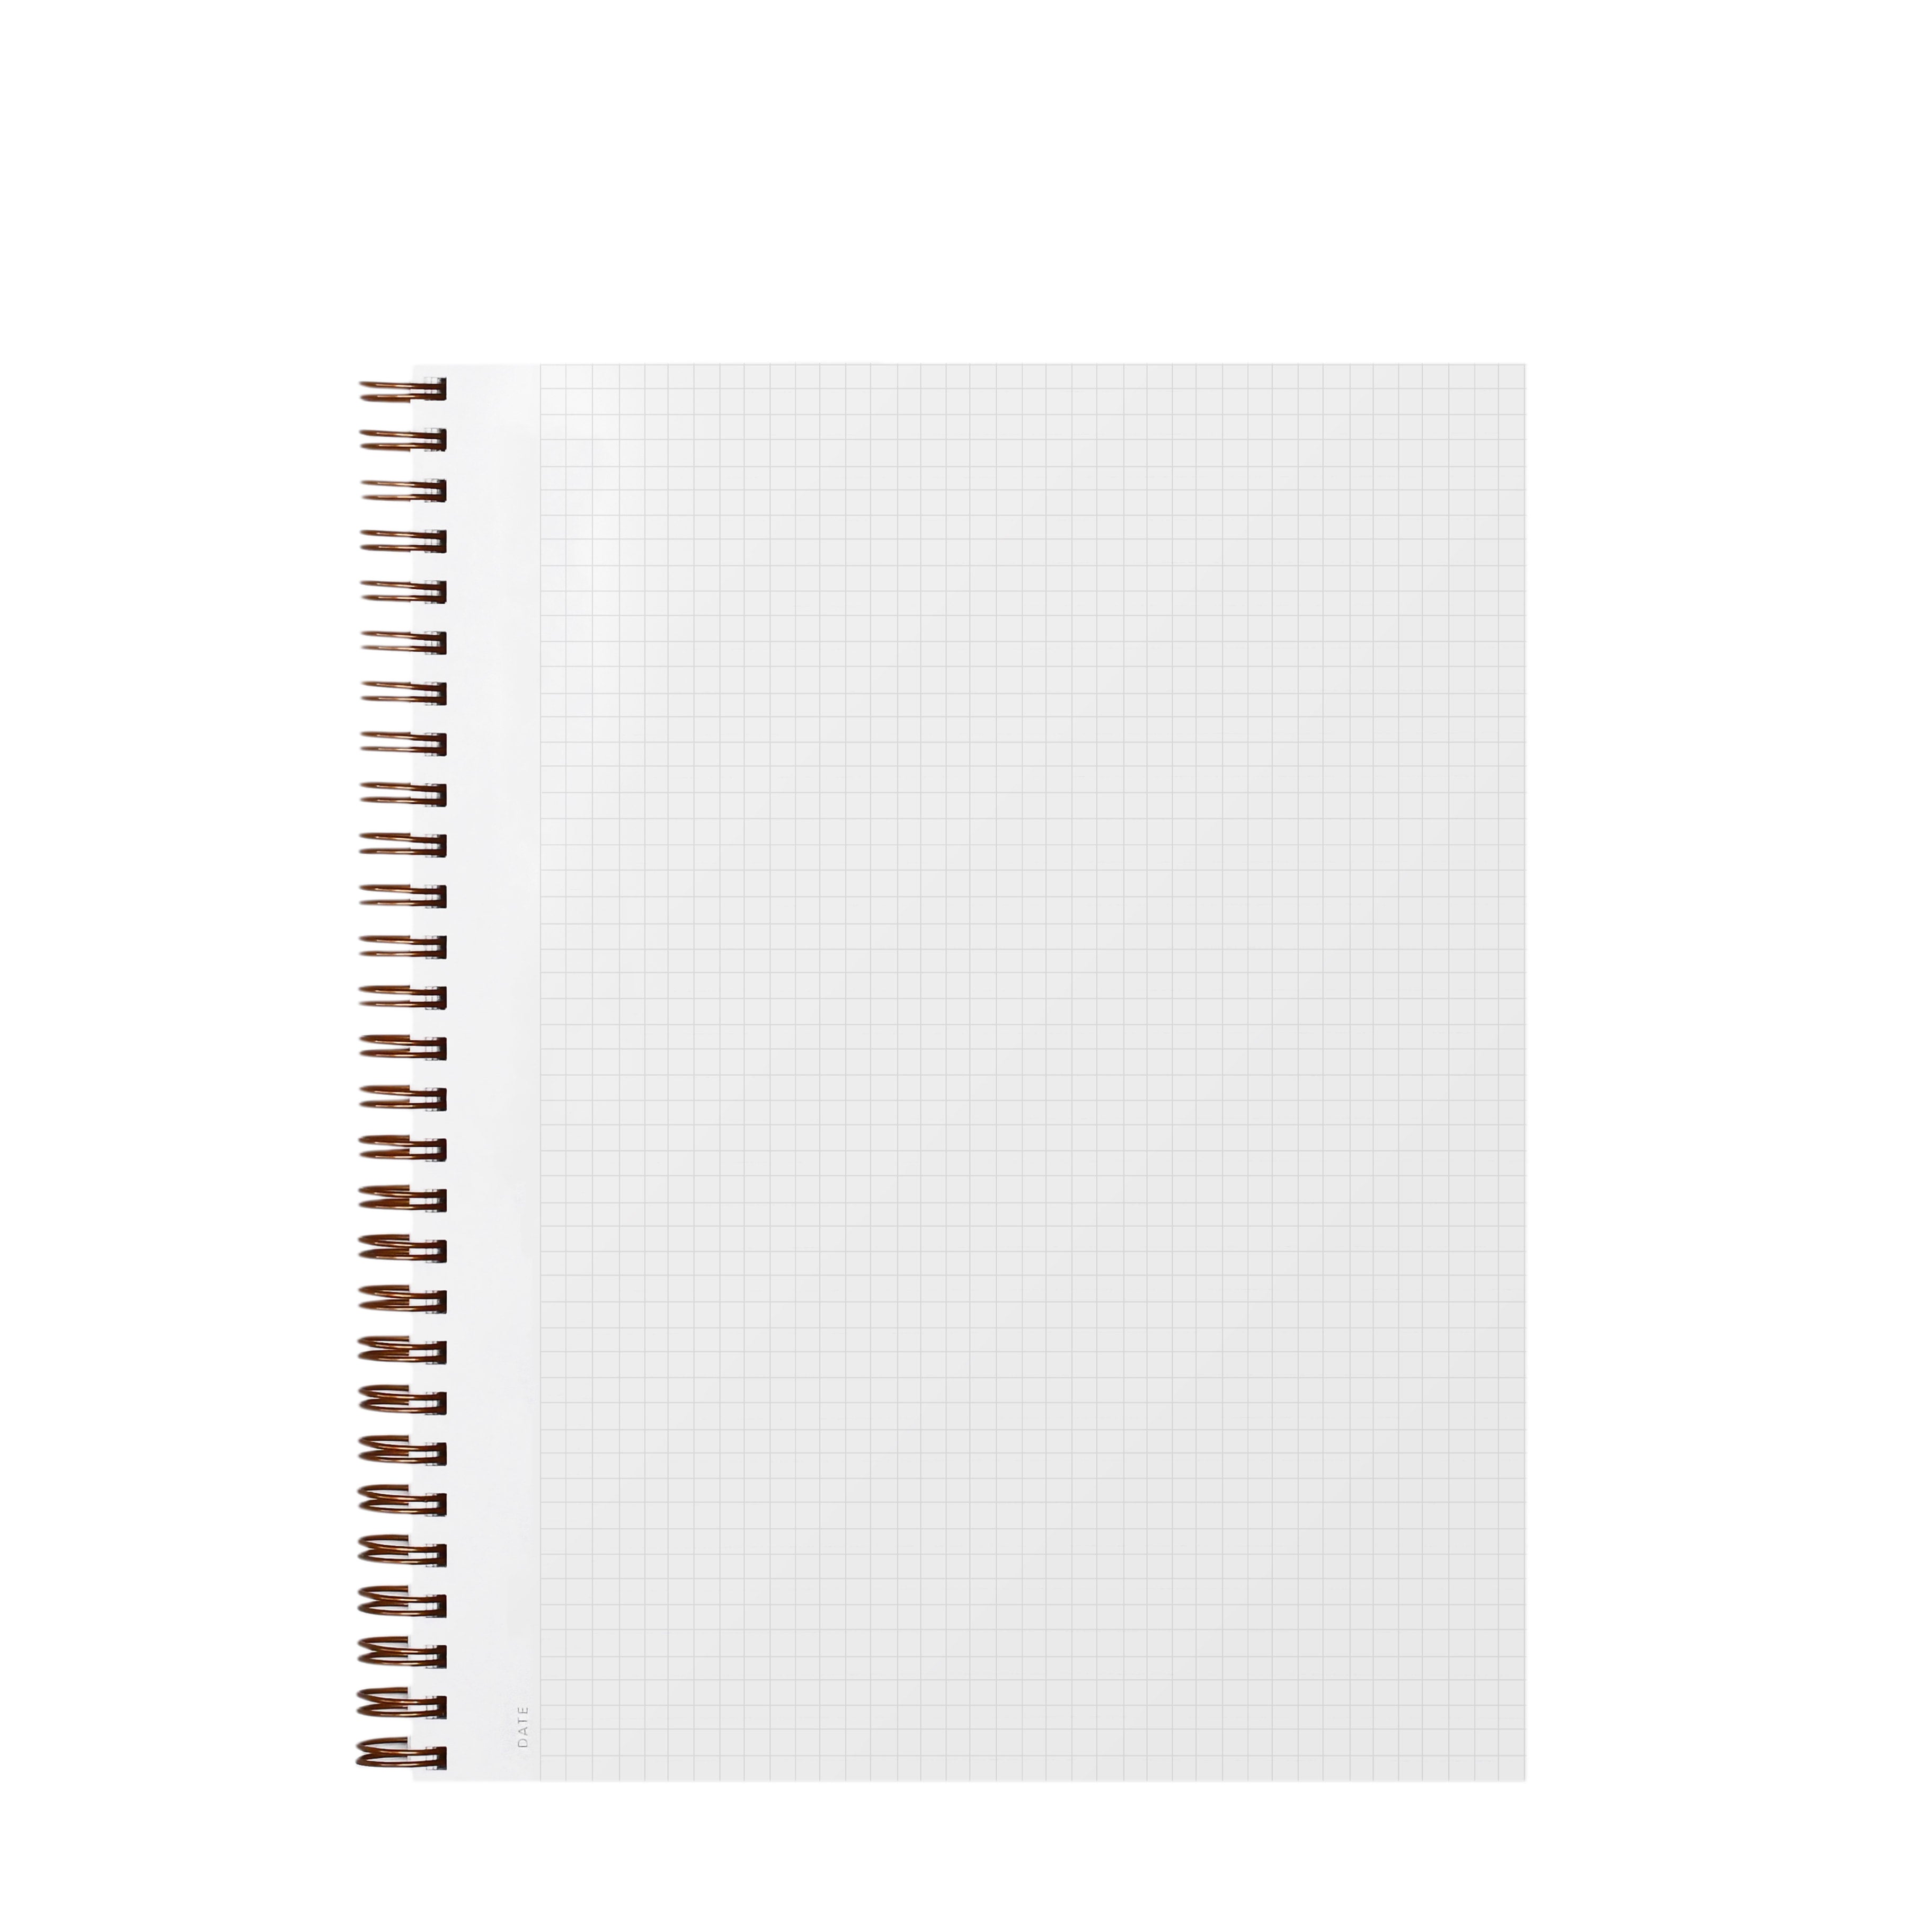 APPOINTED - NOTEBOOK - MINERAL GREEN - GRID